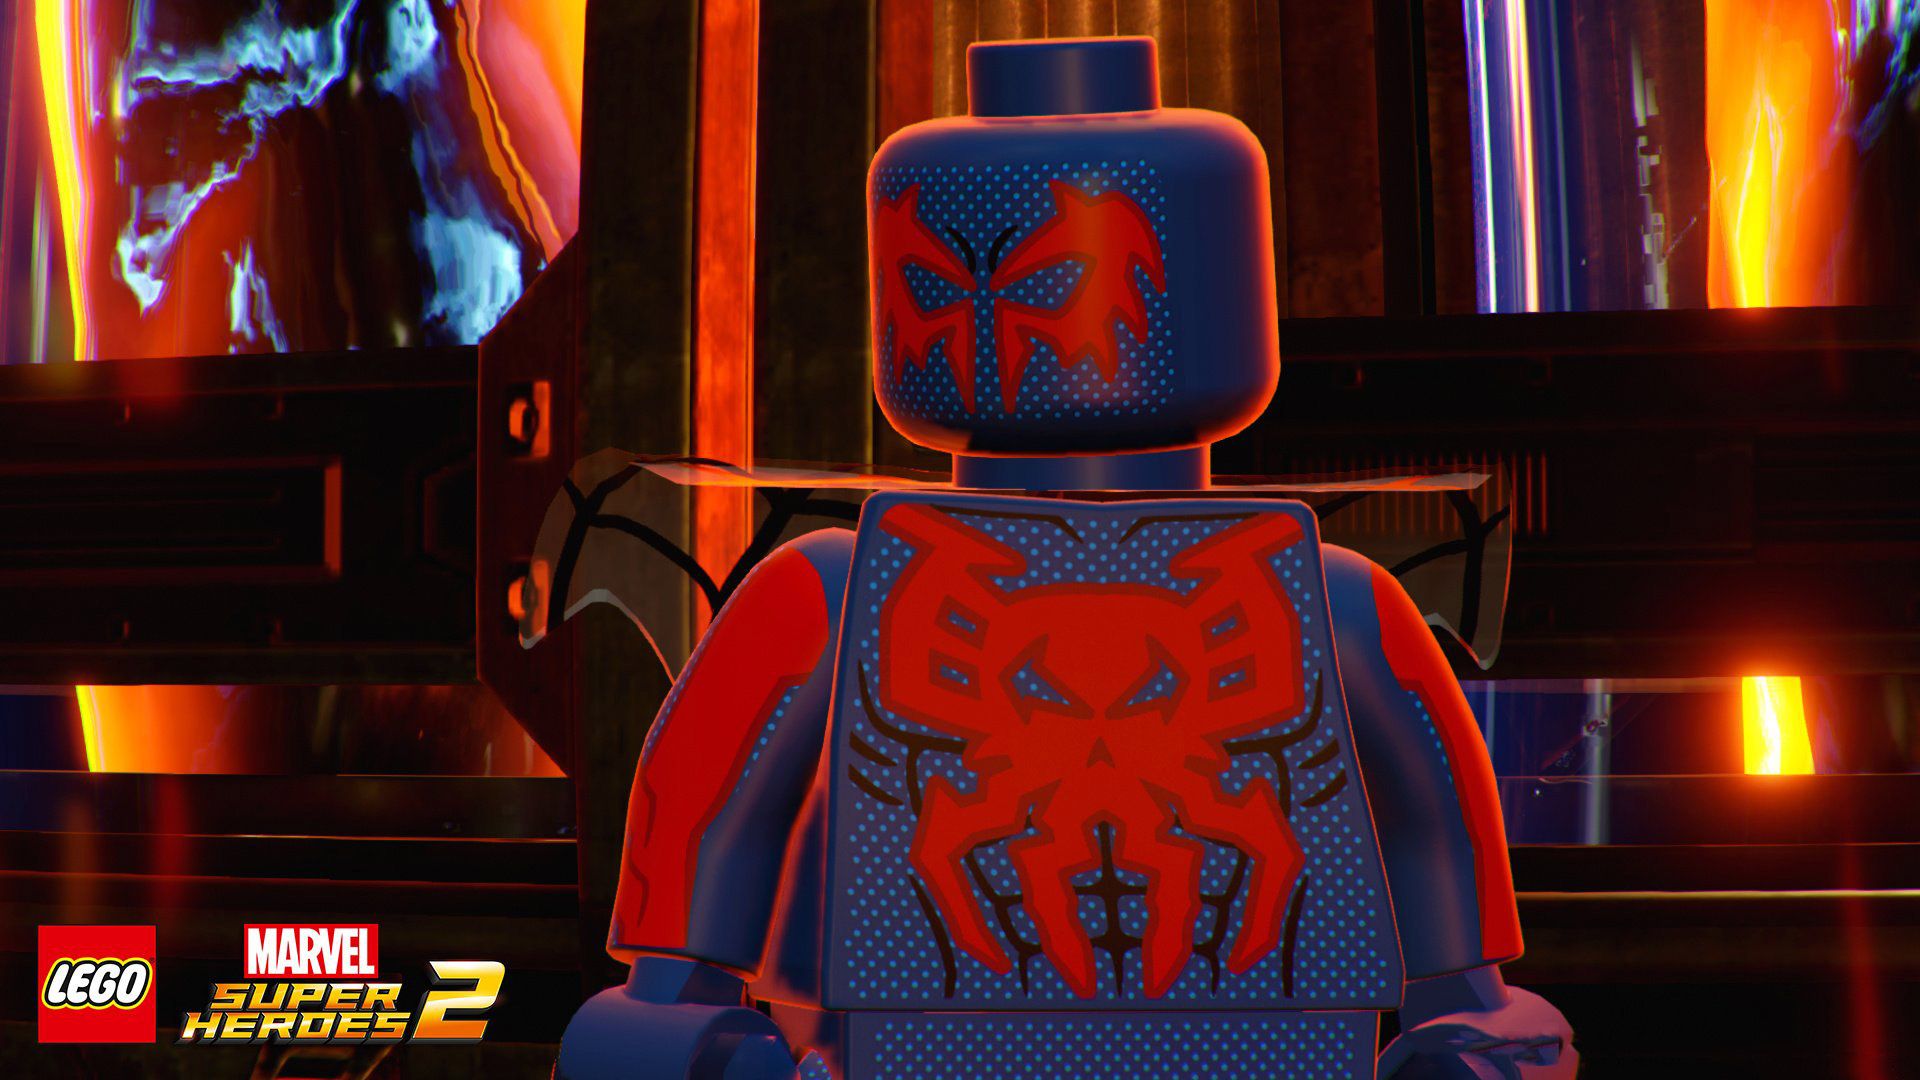 Free Lego Marvel Super Heroes 2 Wallpaper in 1920x1080